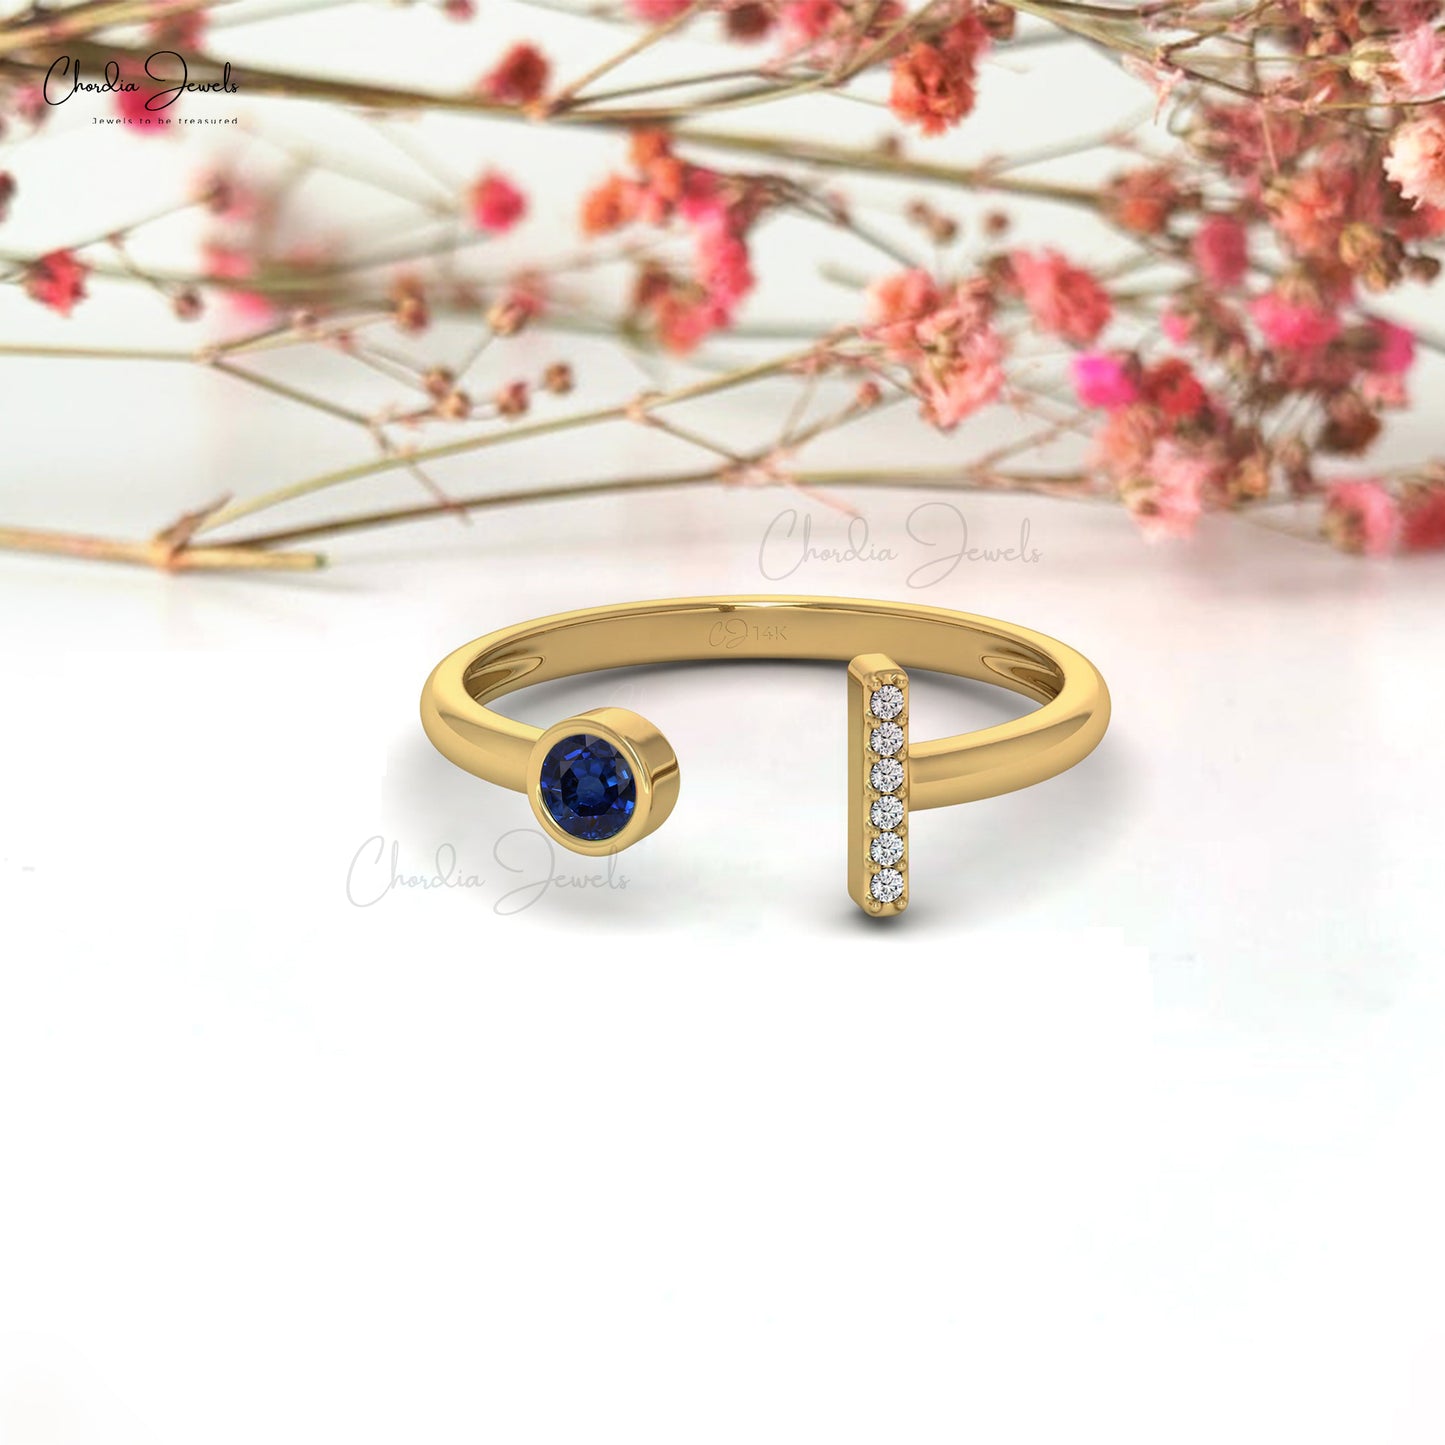 Genuine Blue Sapphire Ring 14k Real Gold Certified Diamond Engagement Ring 3mm Round Cut Gemstone Ring For Gift